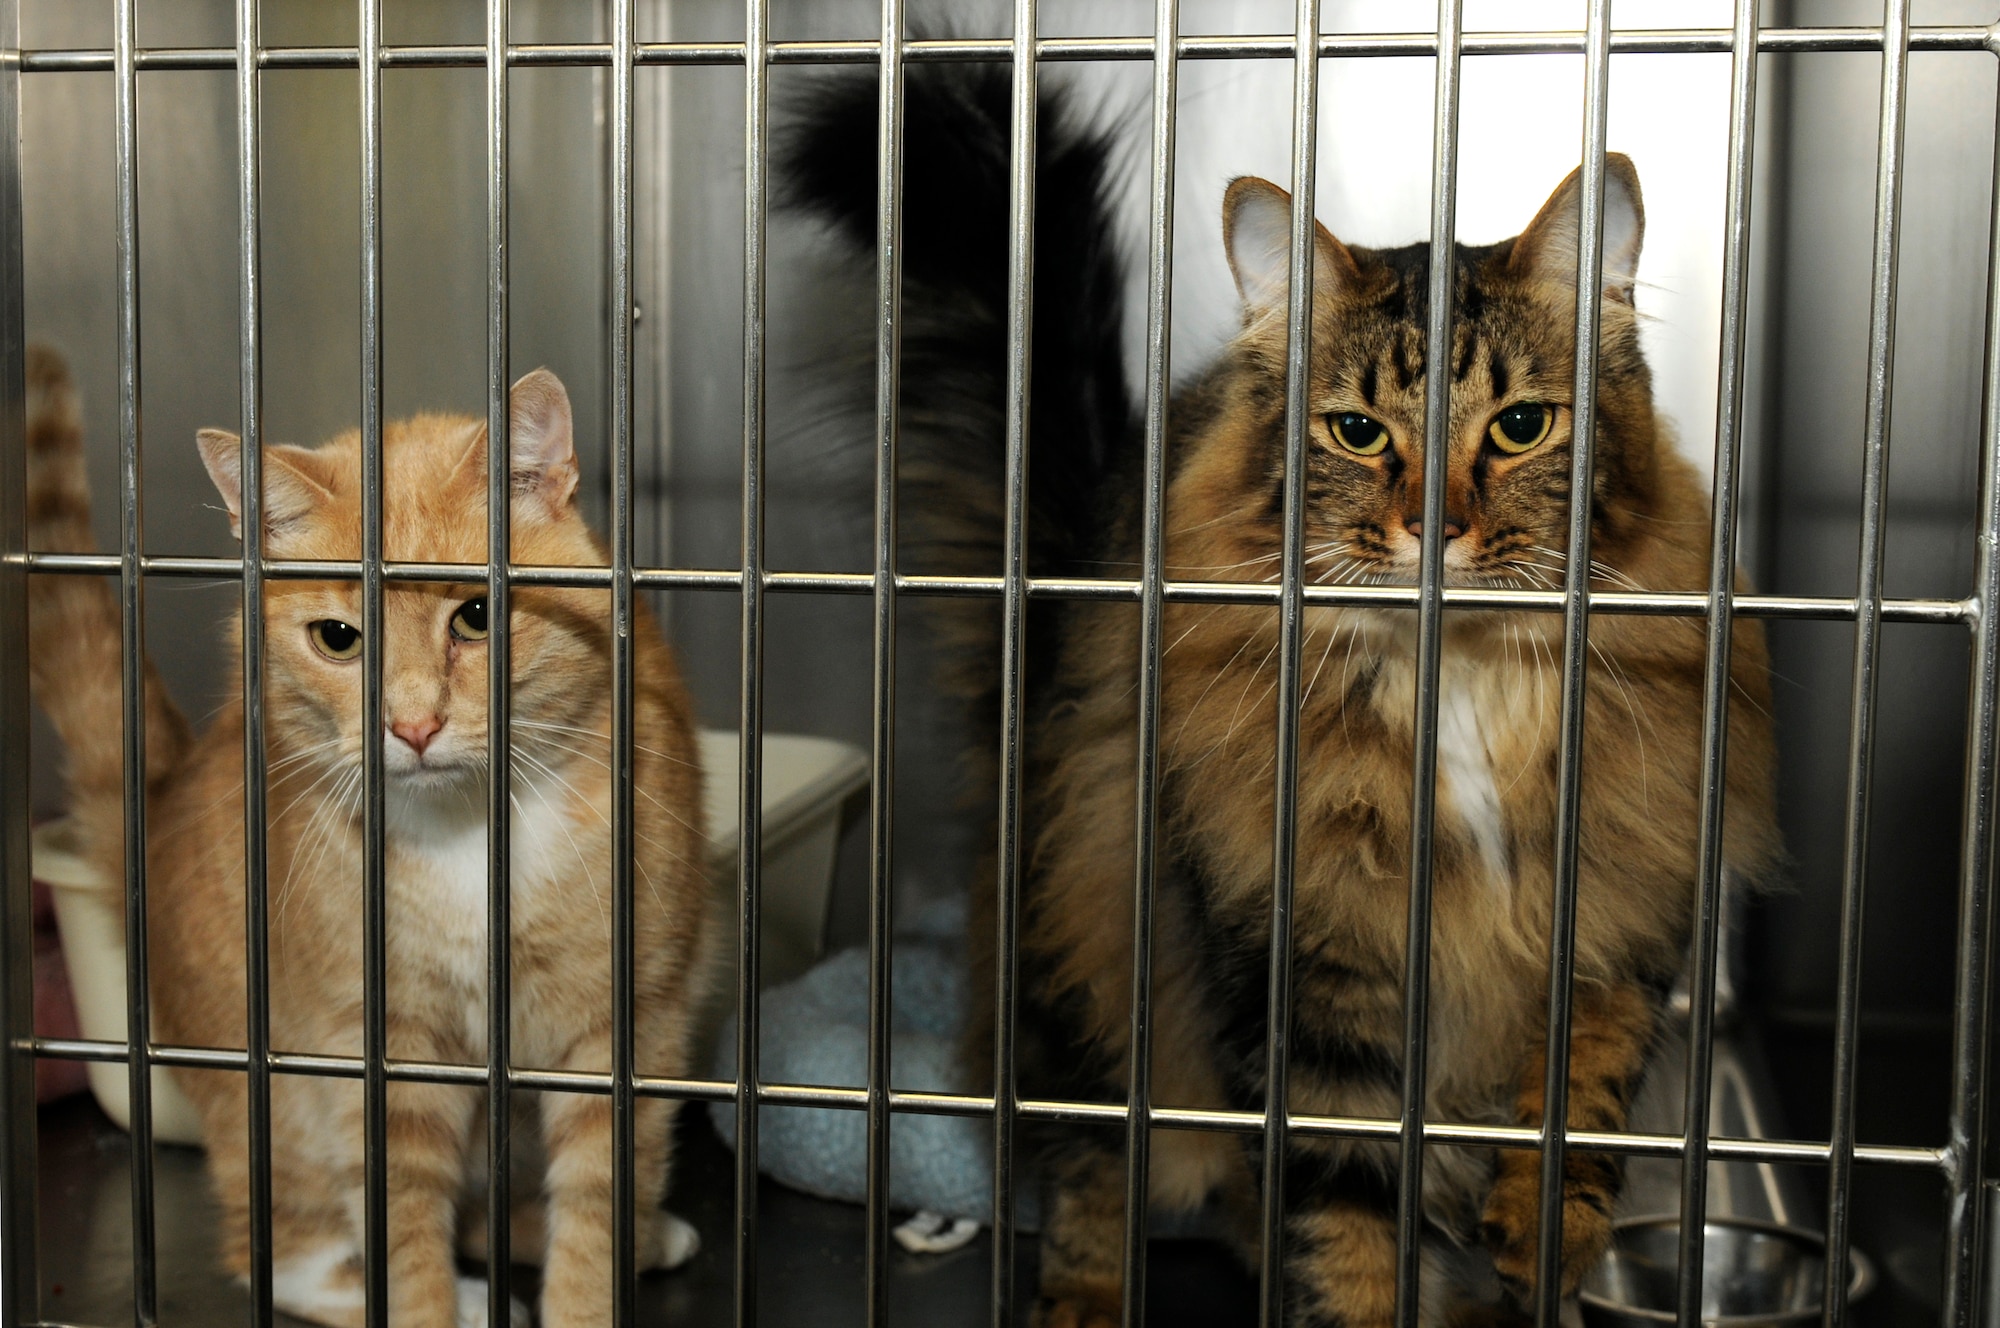 OBERWEIS, Germany -- Rocky and Morris Riggins relax in their kennel at the Pet Spa here Sept. 26. The cats are given a few hours a day to walk around and play freely in a cat room. To board cats, they must have rabies, Felocell and Leukocell vaccinations. (U.S. Air Force photo/Airman 1st Class Brittney Frees)